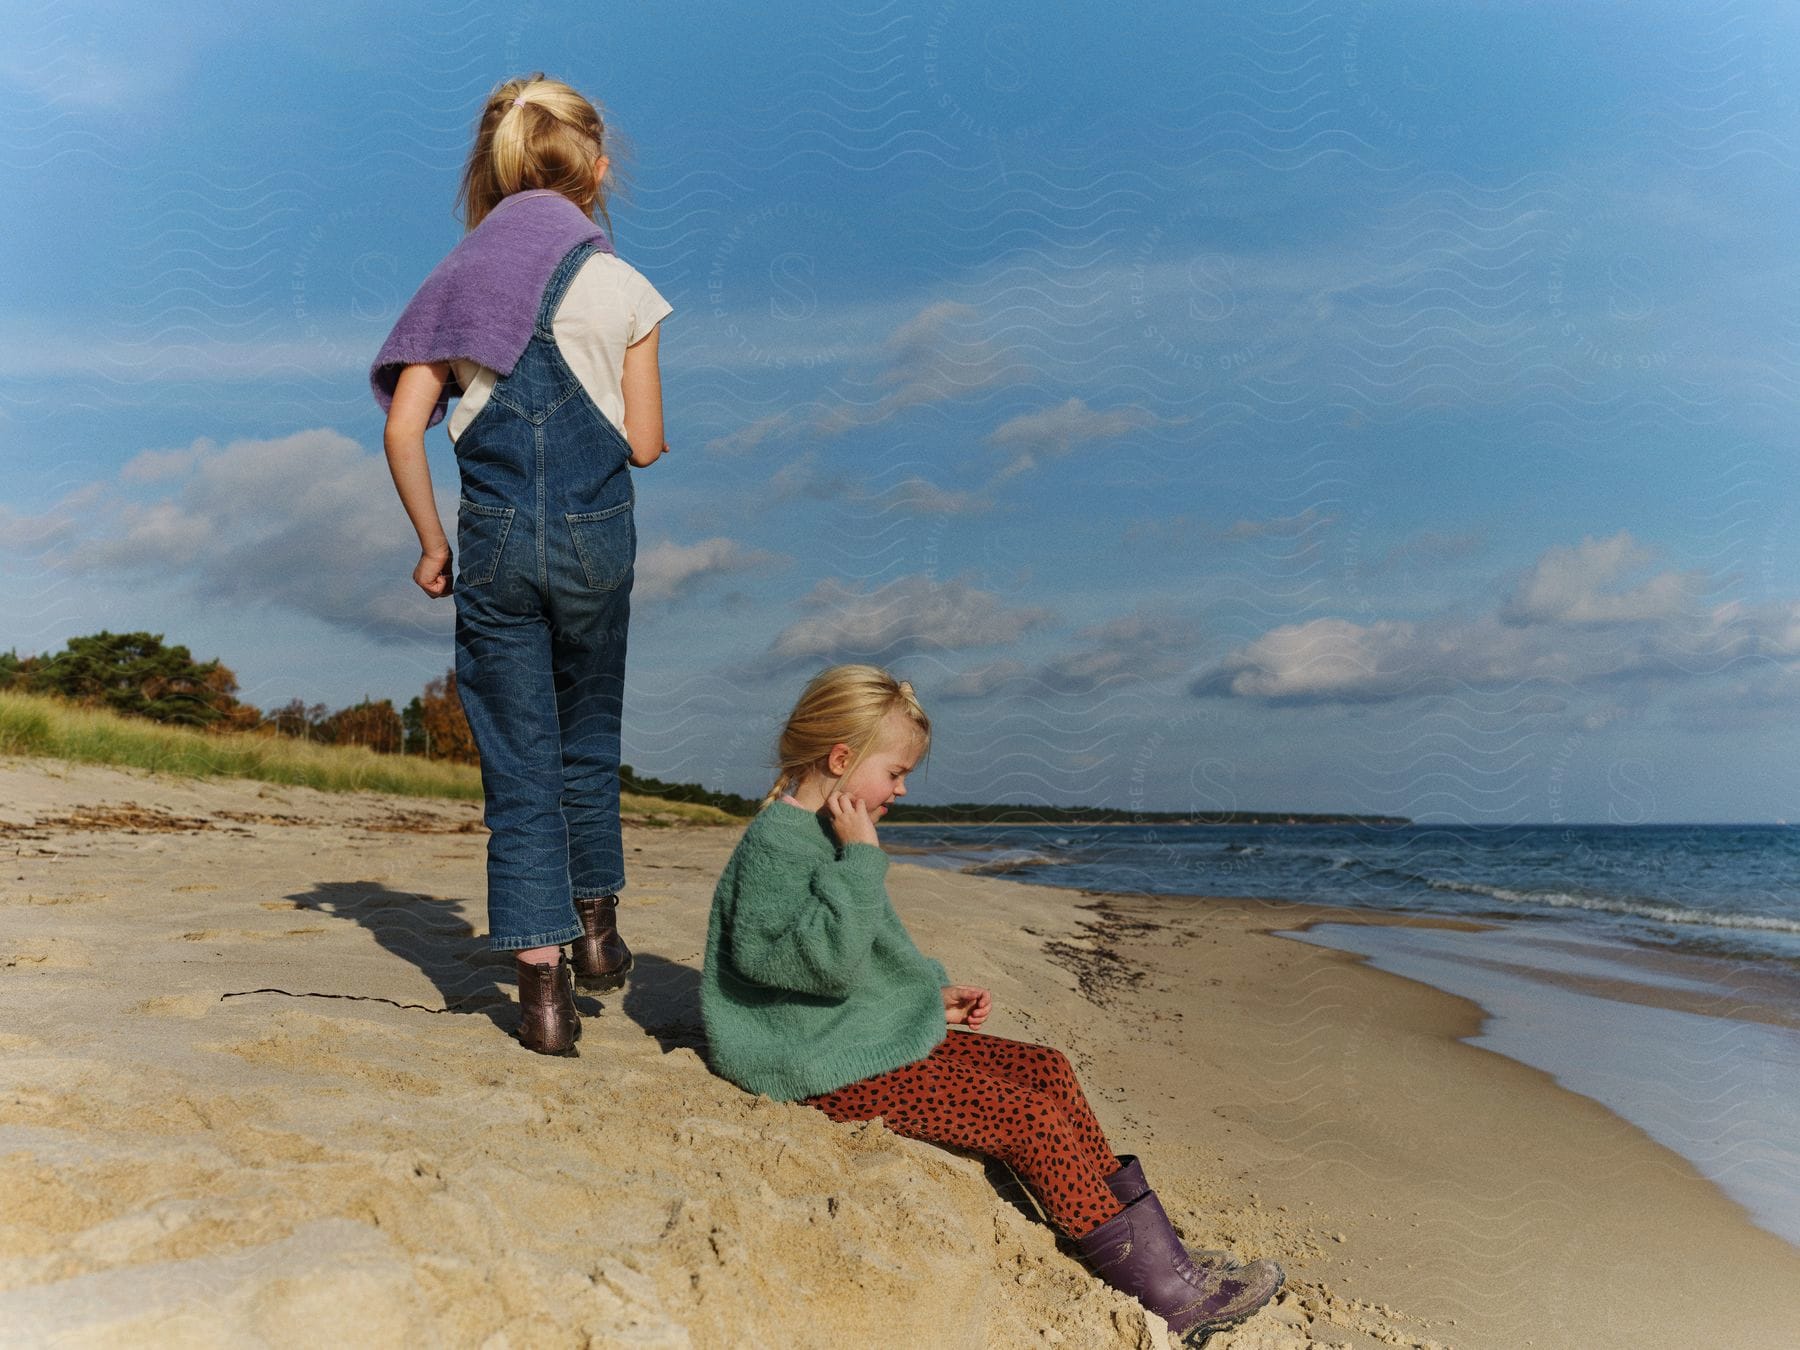 Young girl sitting in sand near water as another girl walks behind her both casting shadows in sand from sun